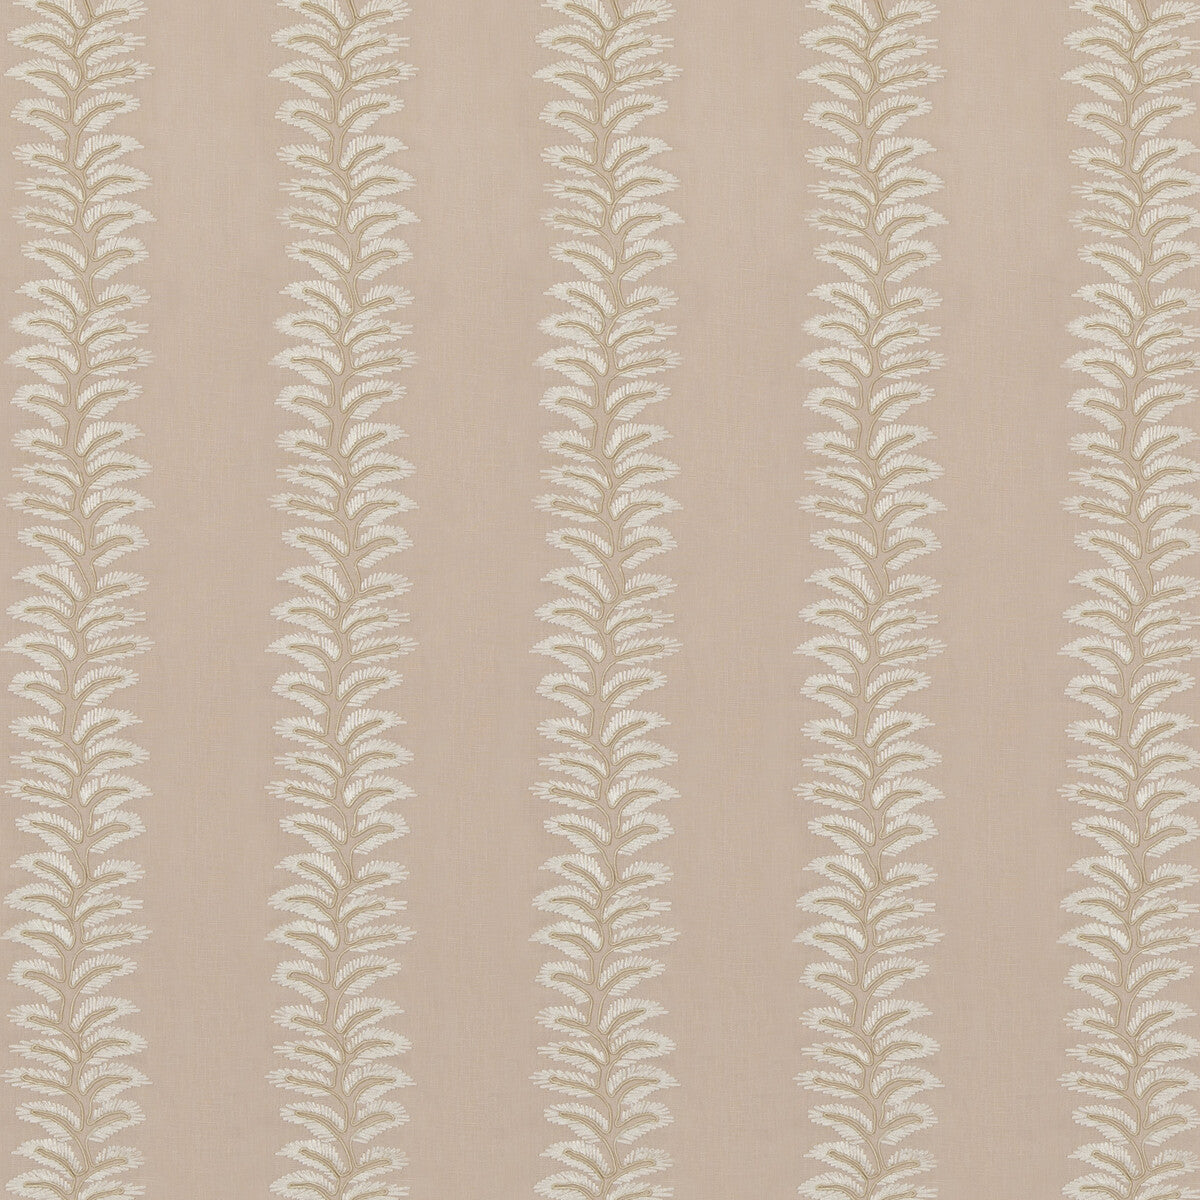 New Bradbourne fabric in blush color - pattern BF10946.440.0 - by G P &amp; J Baker in the Ashmore collection